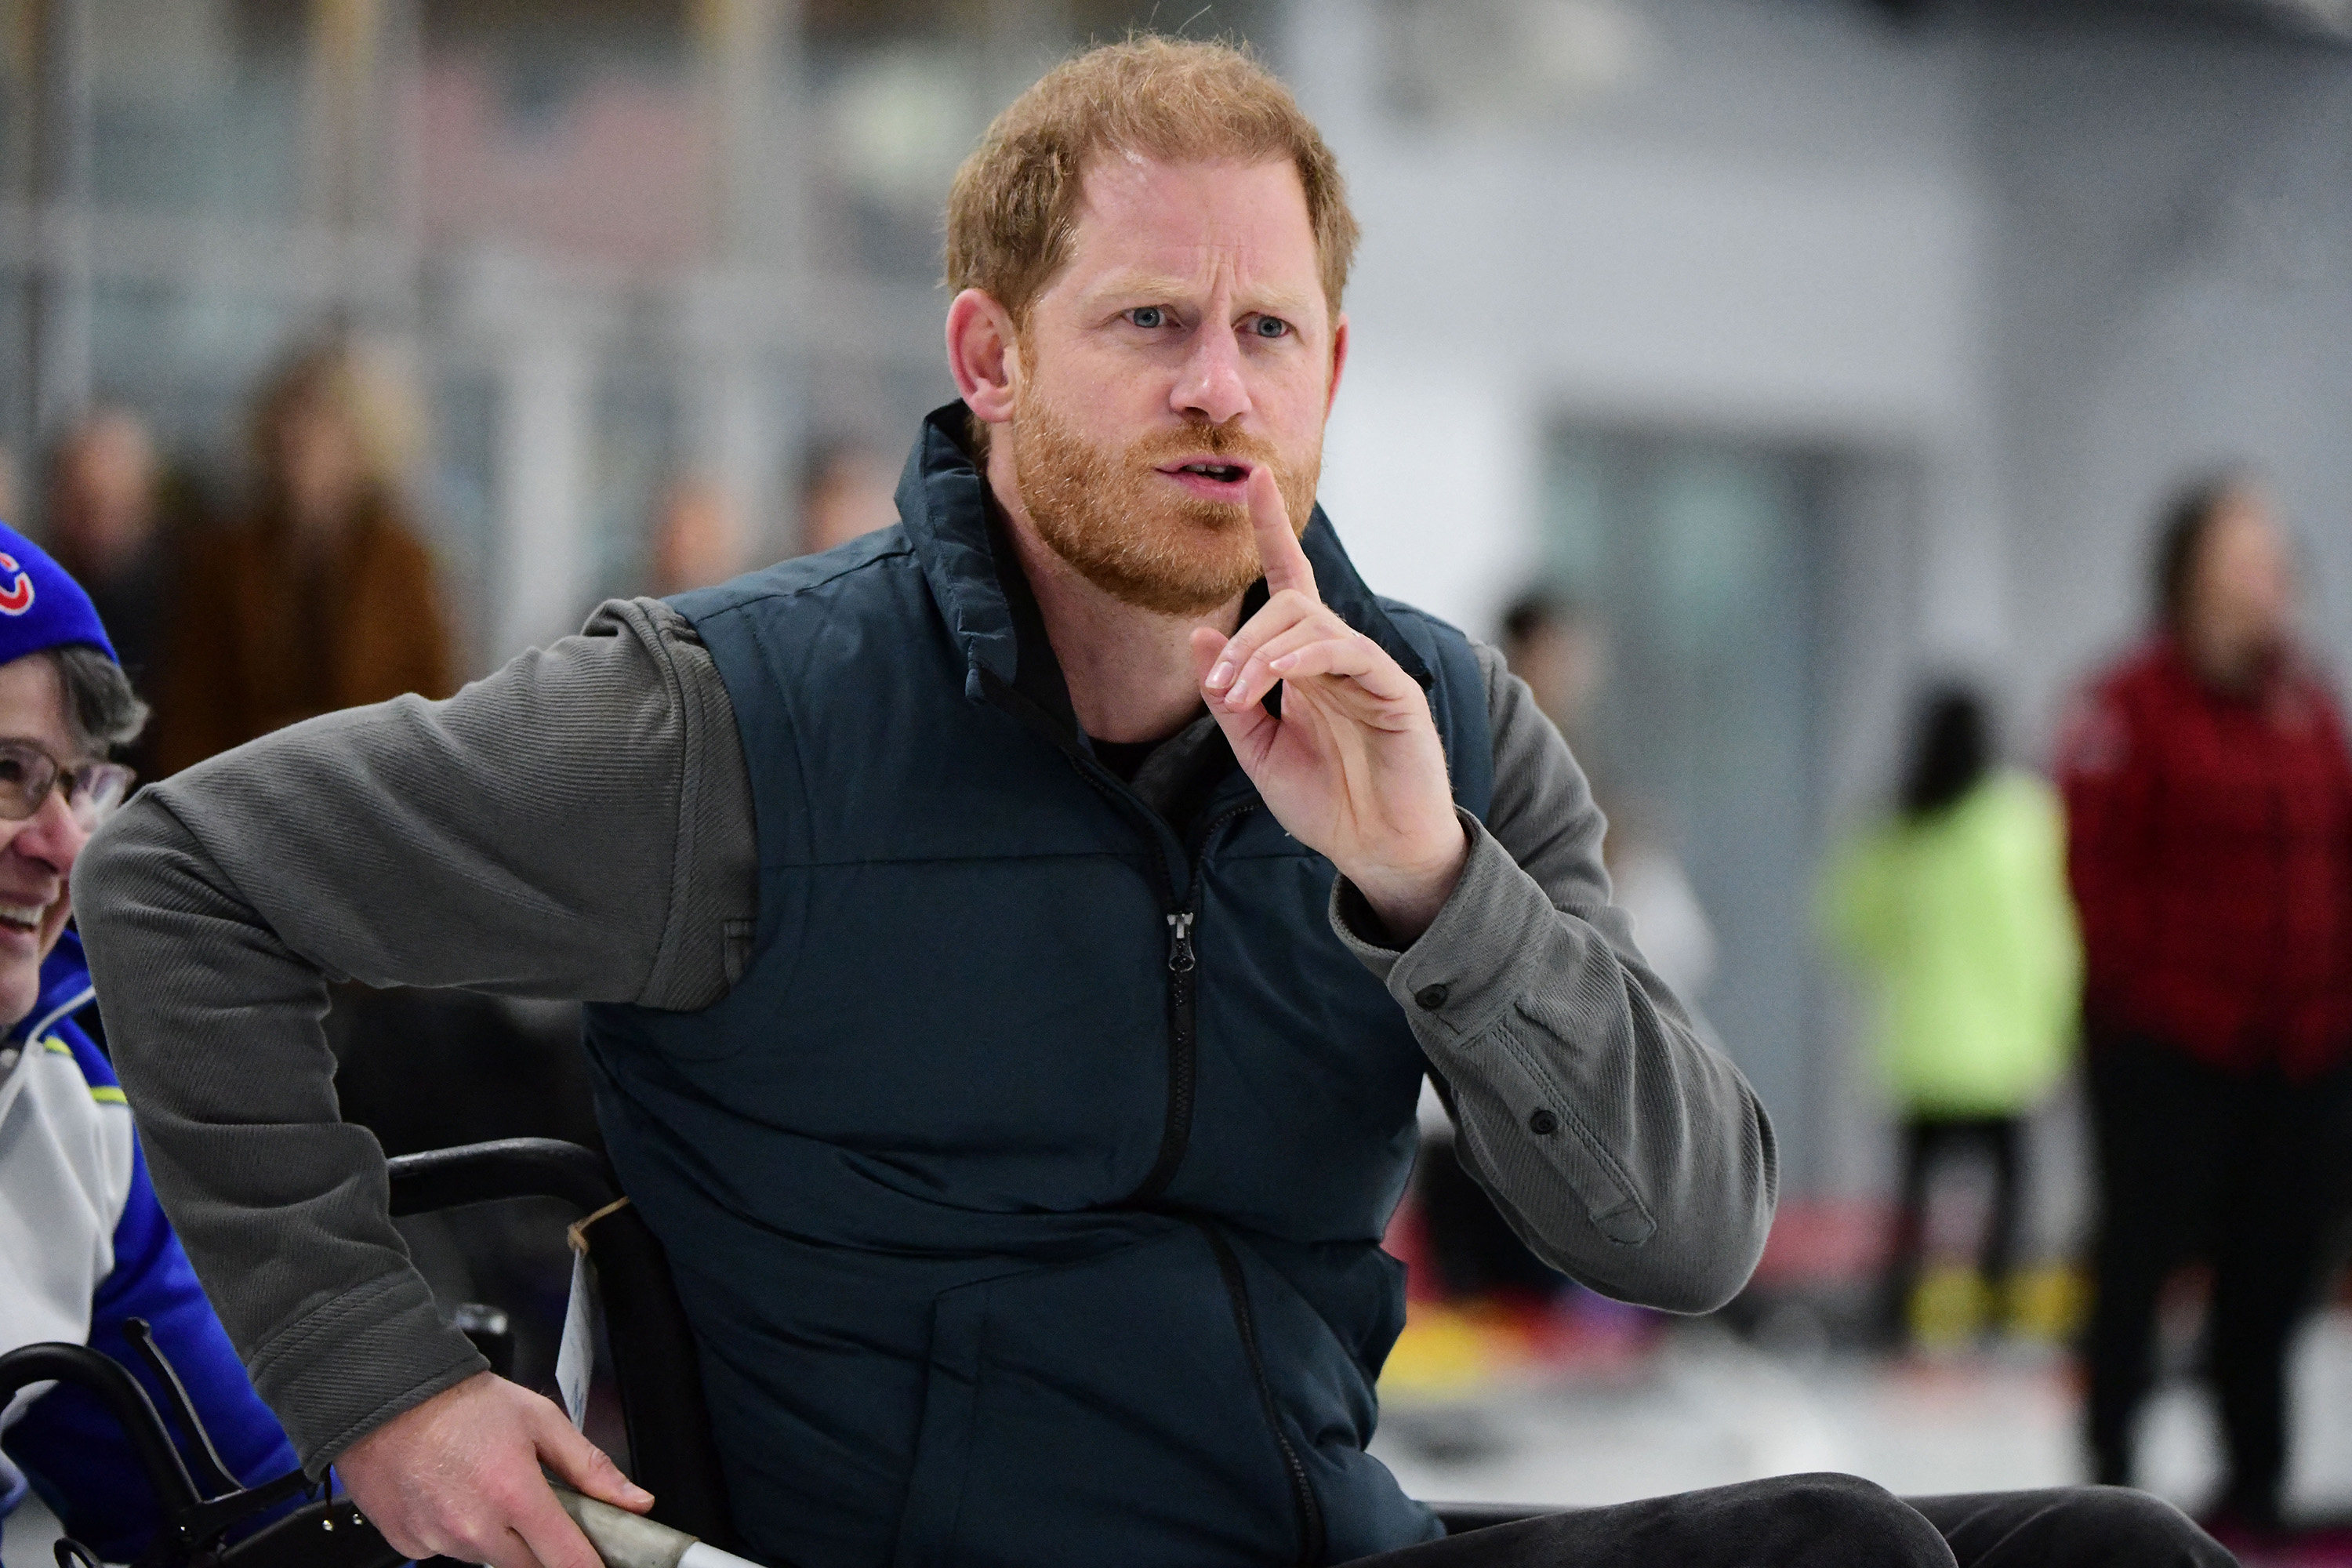 Britain’s Prince Harry has lost his first attempt to appeal in challenge over his UK police protection. Photo: AFP / Getty Images / TNS